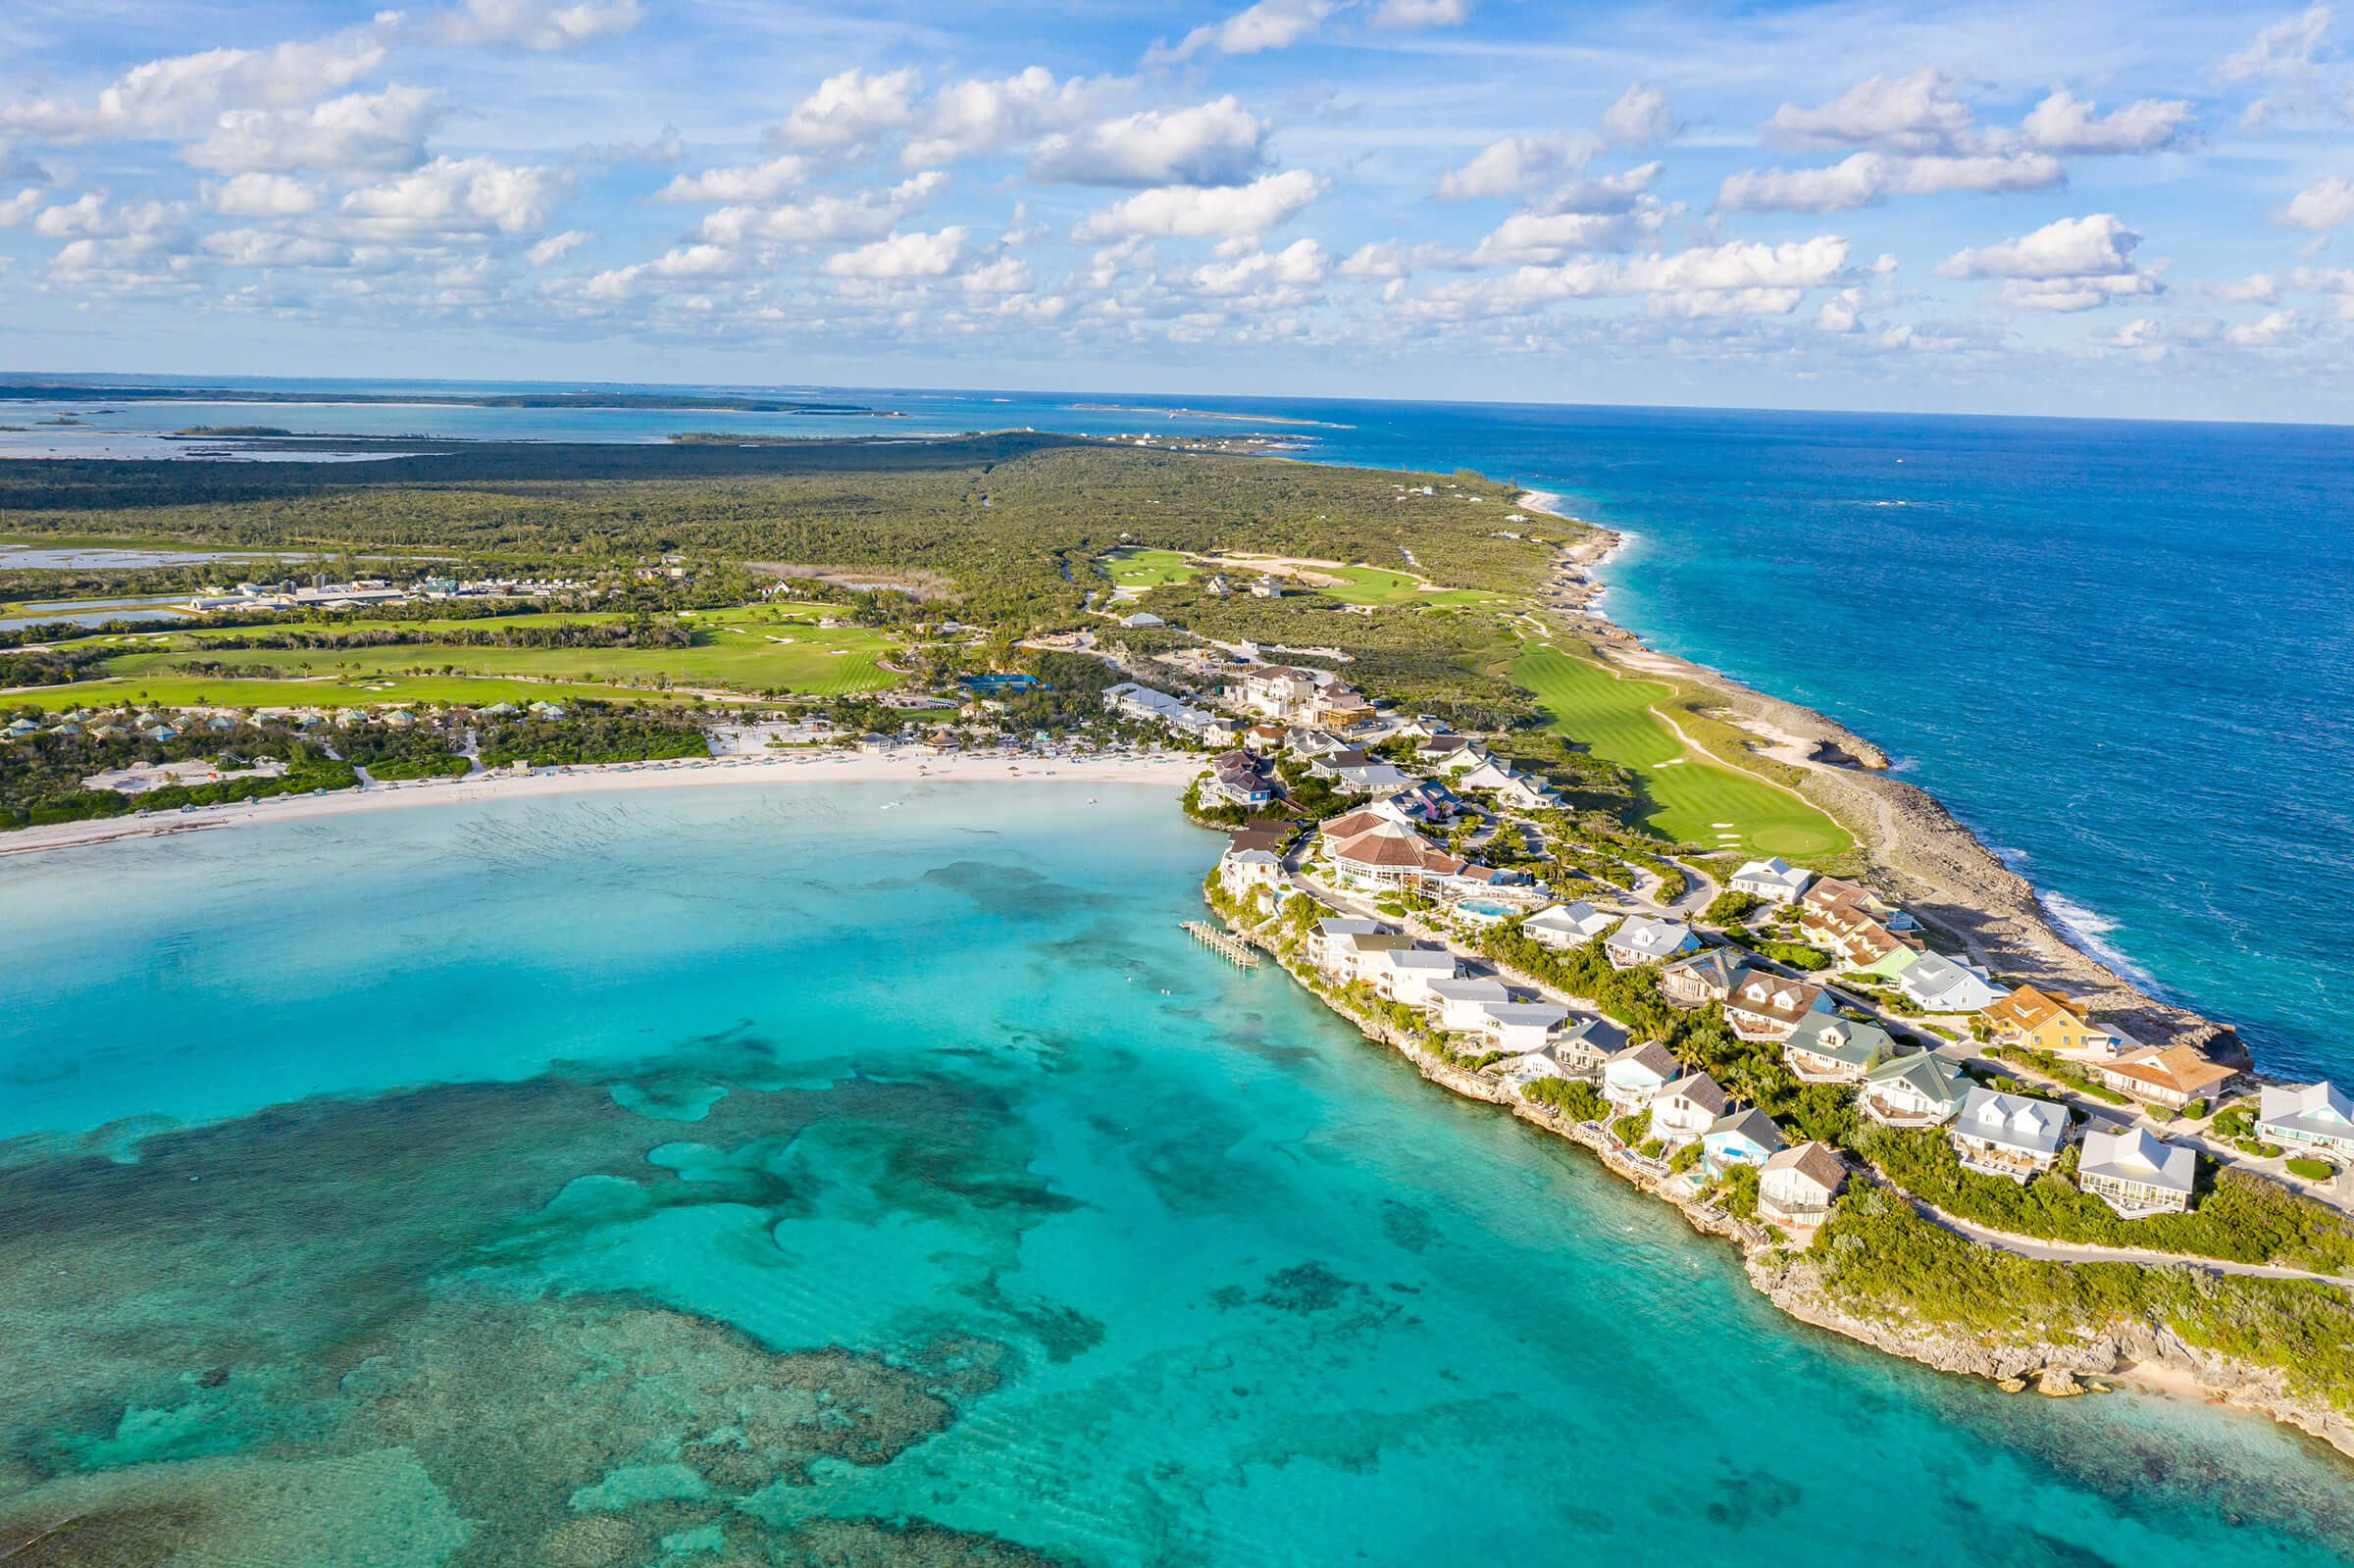 The Abaco Club aerial view